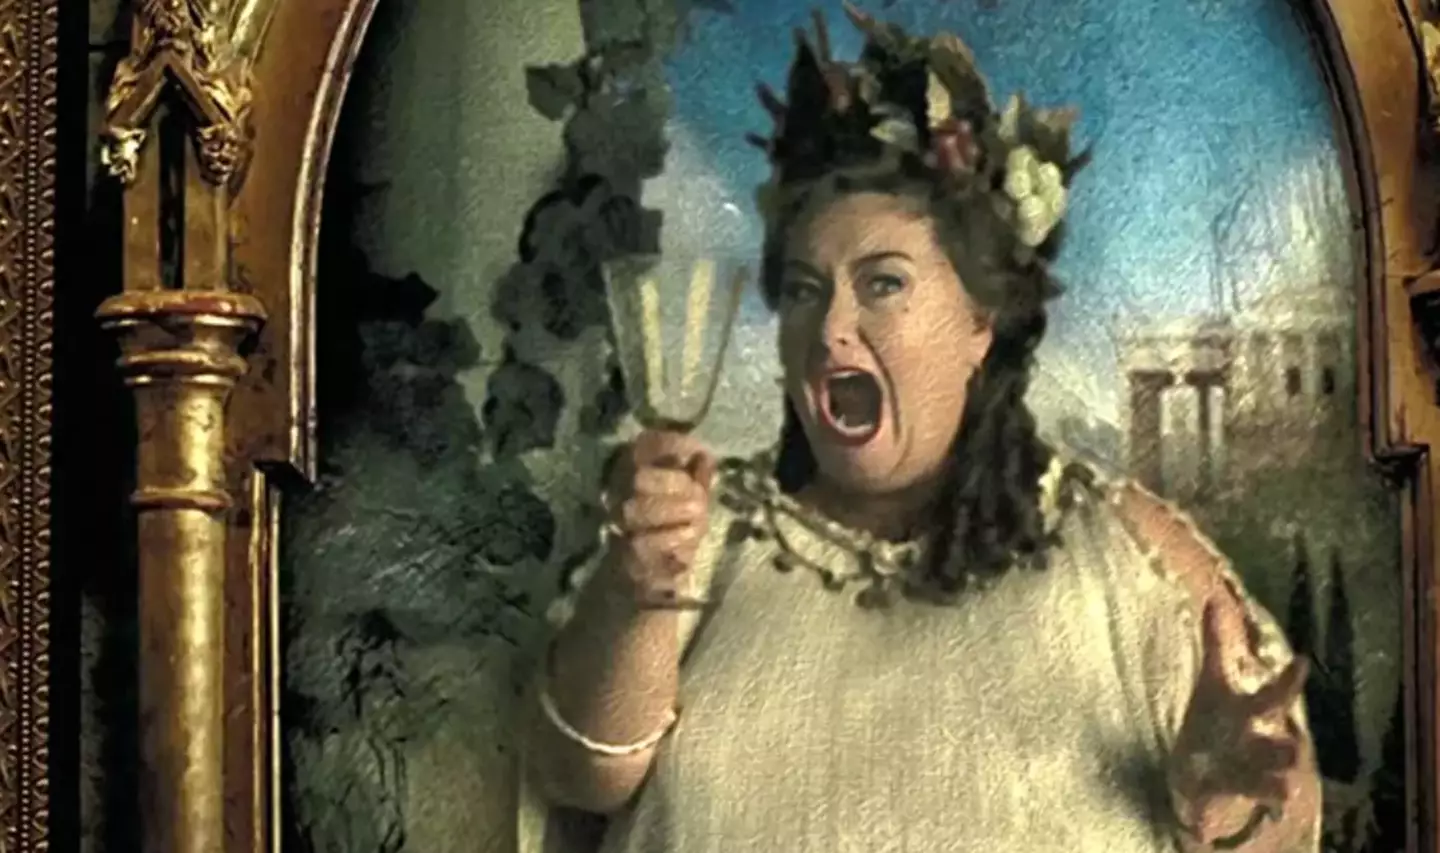 Dawn French later played The Fat Lady (Warner Bros)